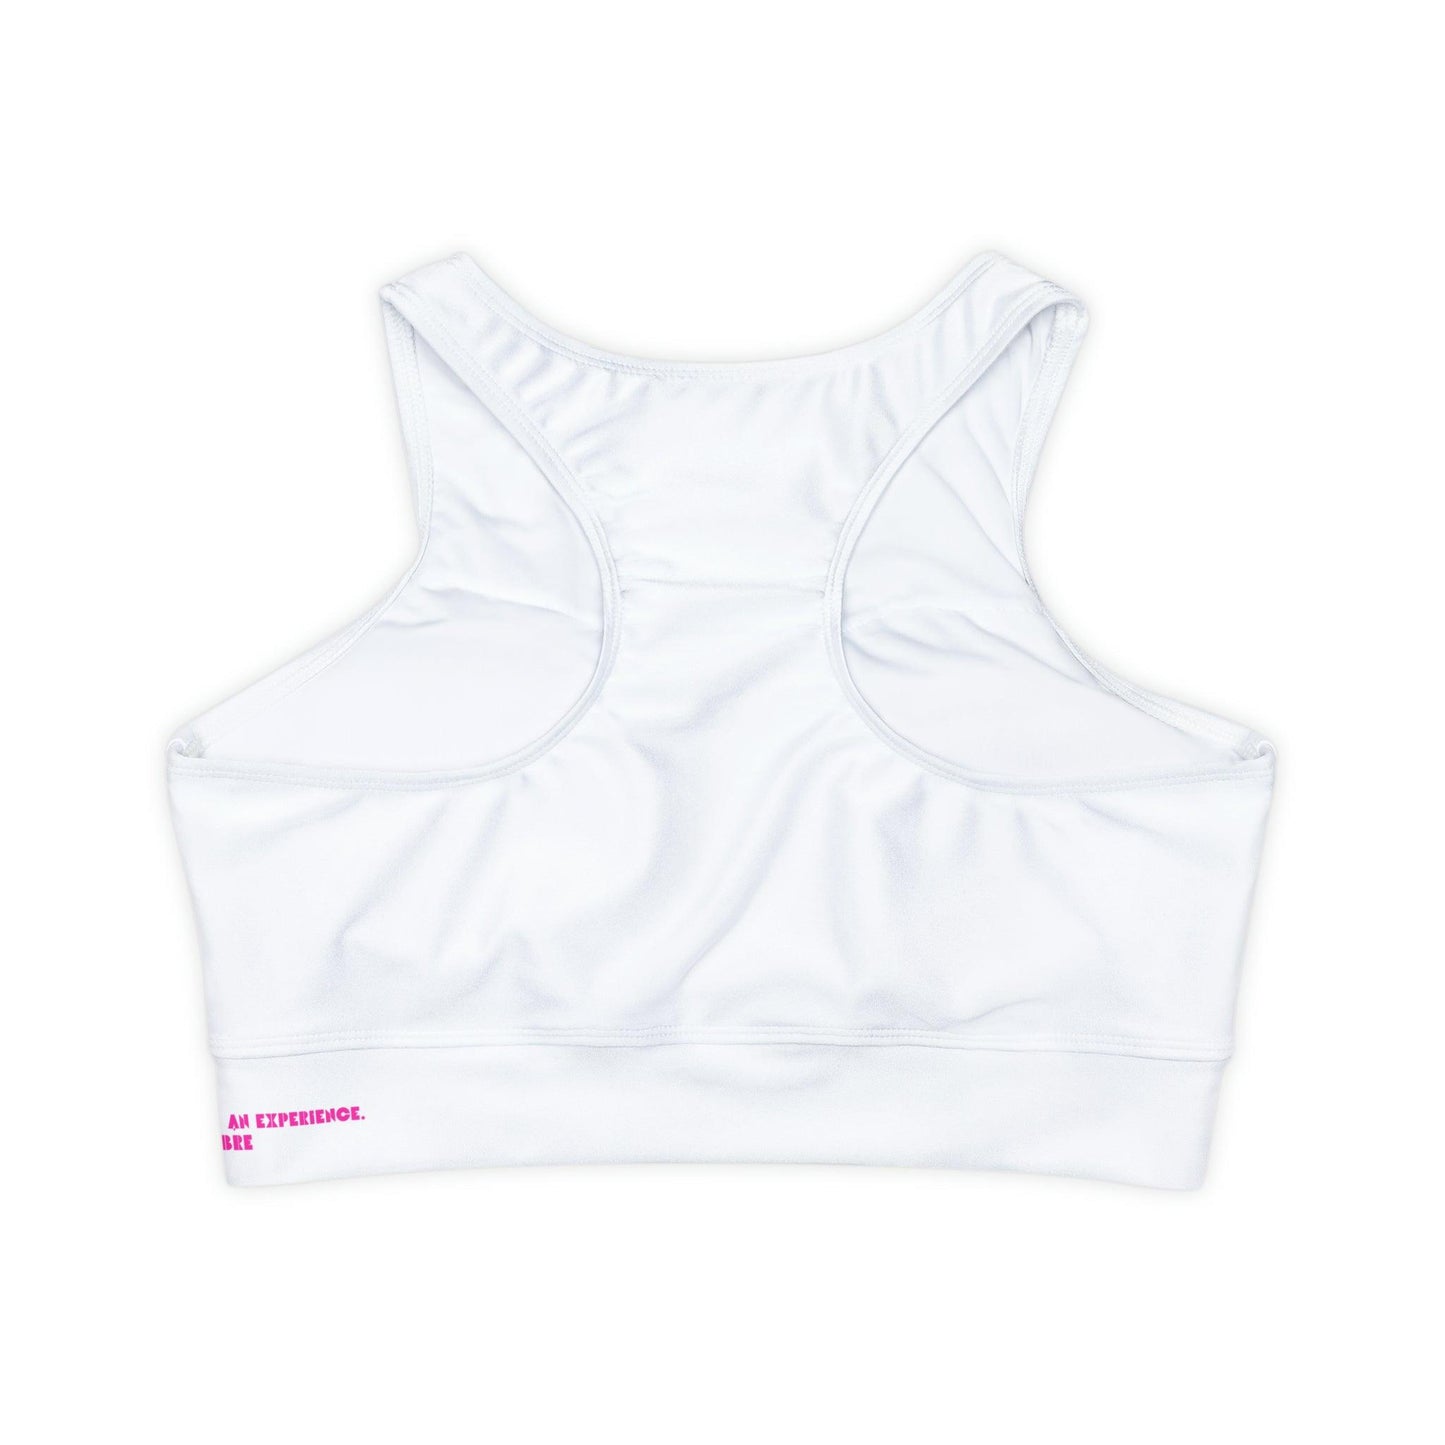 Coffeebre Lifestyle Fully Lined, Padded Sports Bra - COFFEEBRE